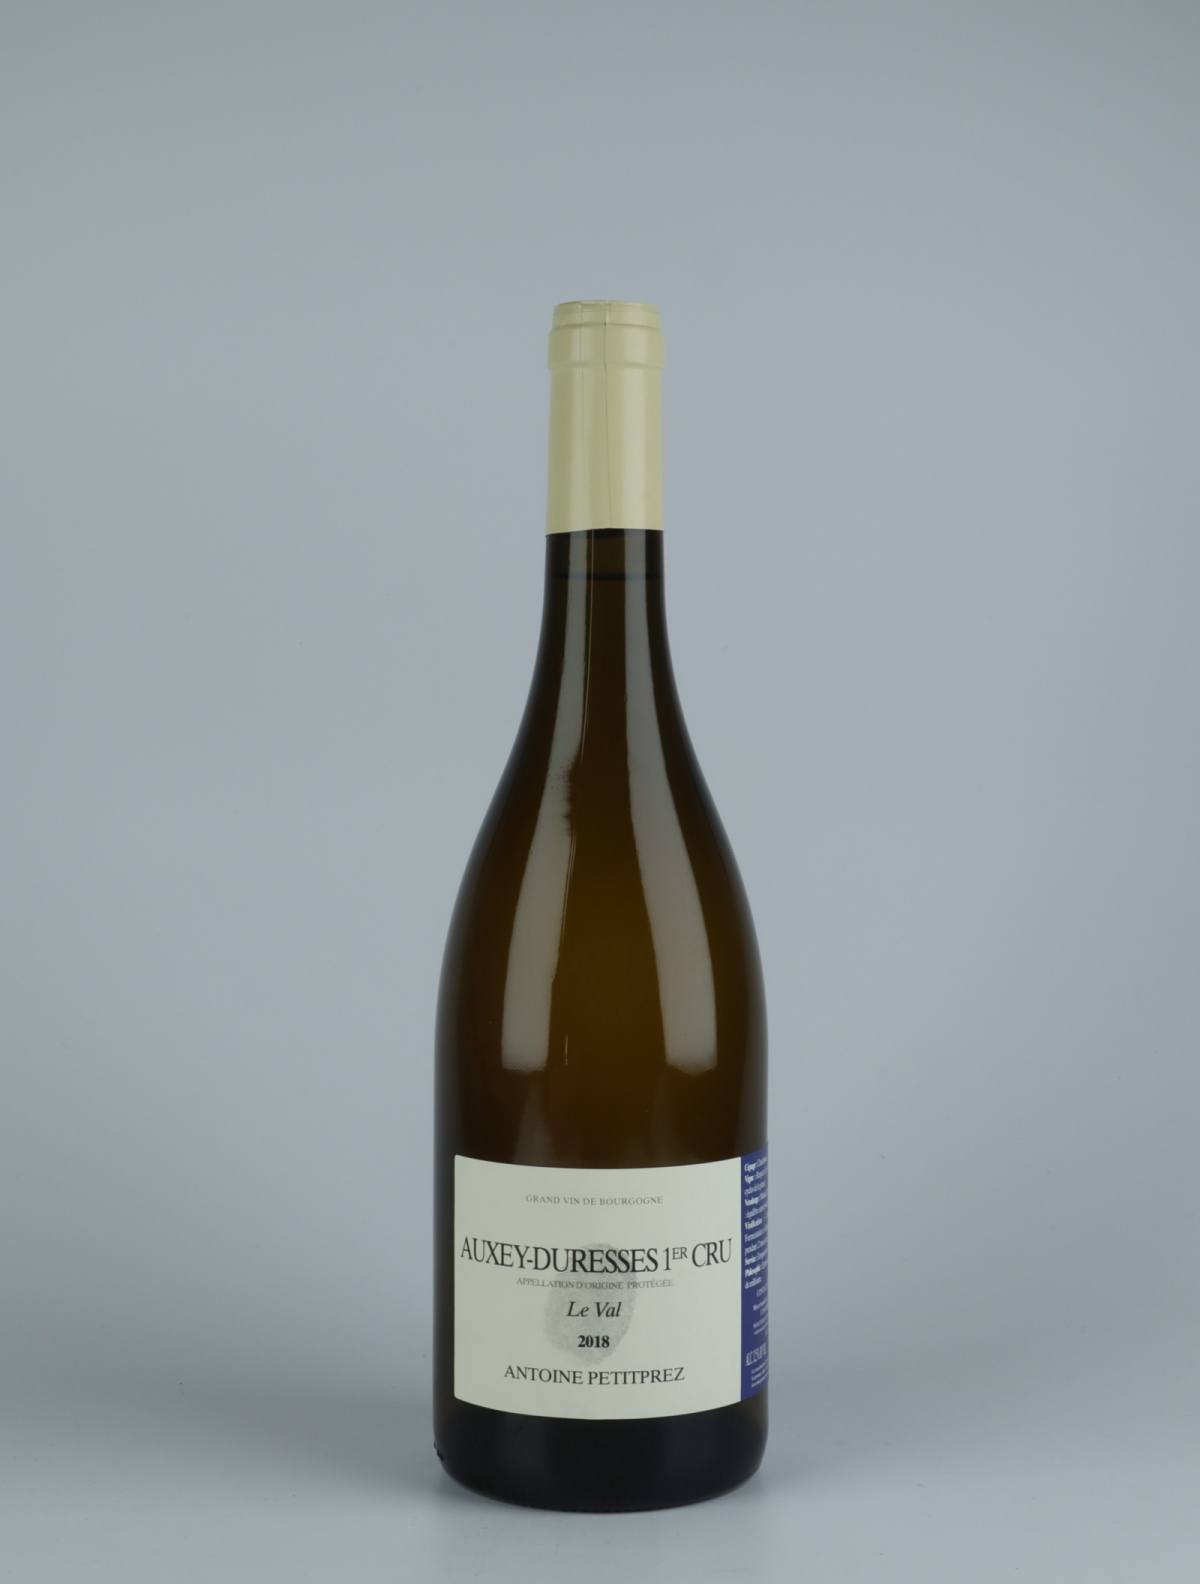 A bottle 2018 Auxey Duresses 1. Cru - Le Val White wine from Antoine Petitprez, Burgundy in France